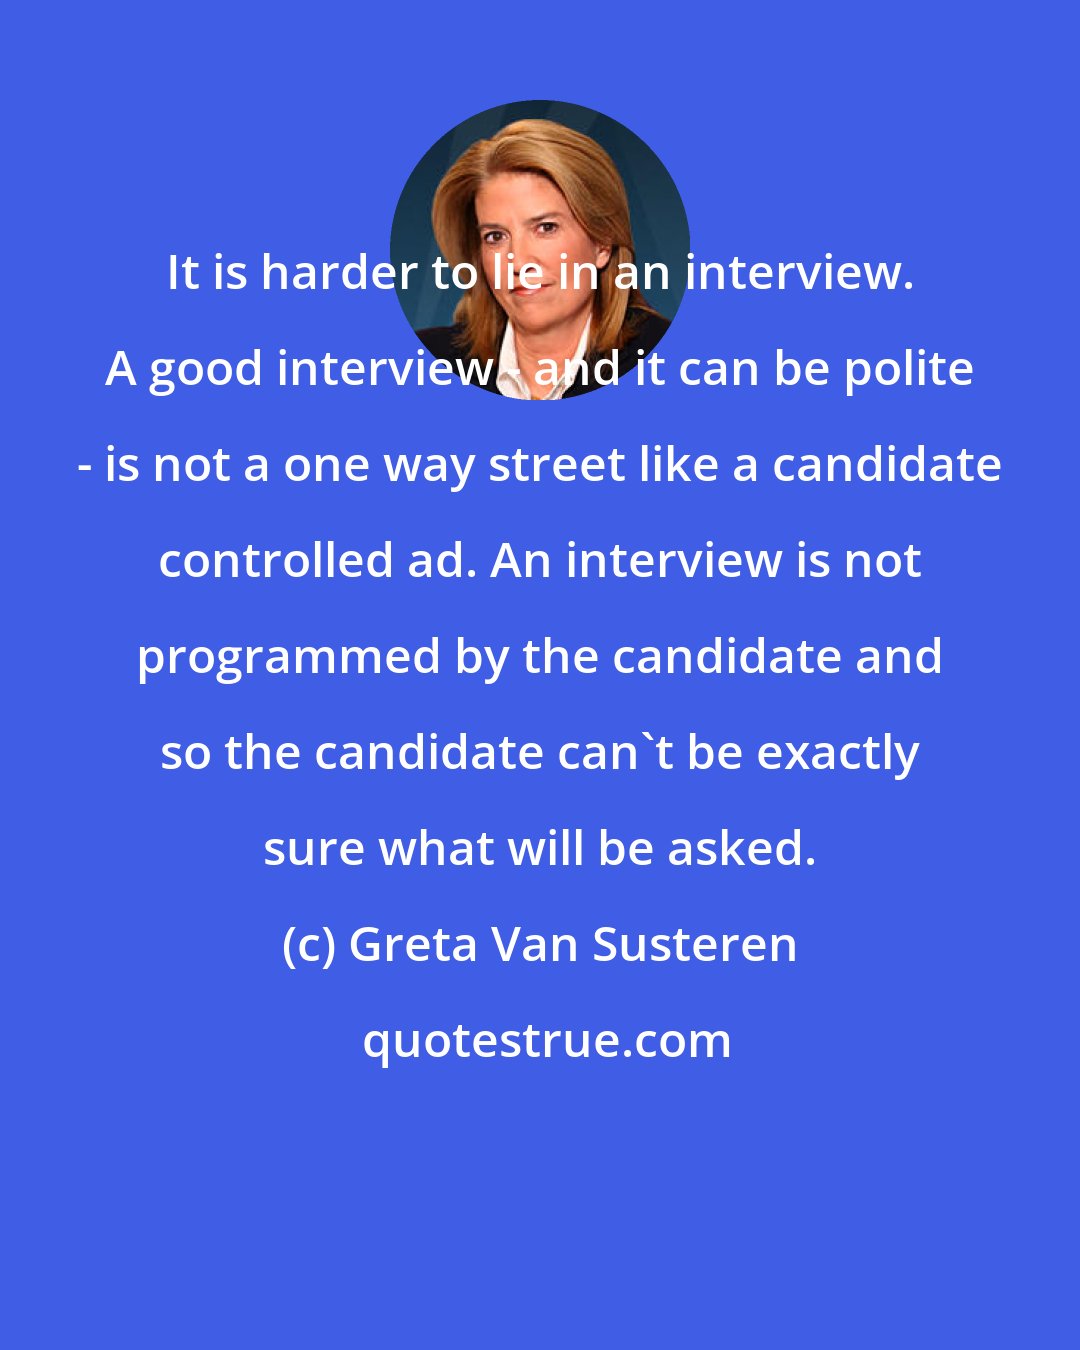 Greta Van Susteren: It is harder to lie in an interview. A good interview - and it can be polite - is not a one way street like a candidate controlled ad. An interview is not programmed by the candidate and so the candidate can't be exactly sure what will be asked.